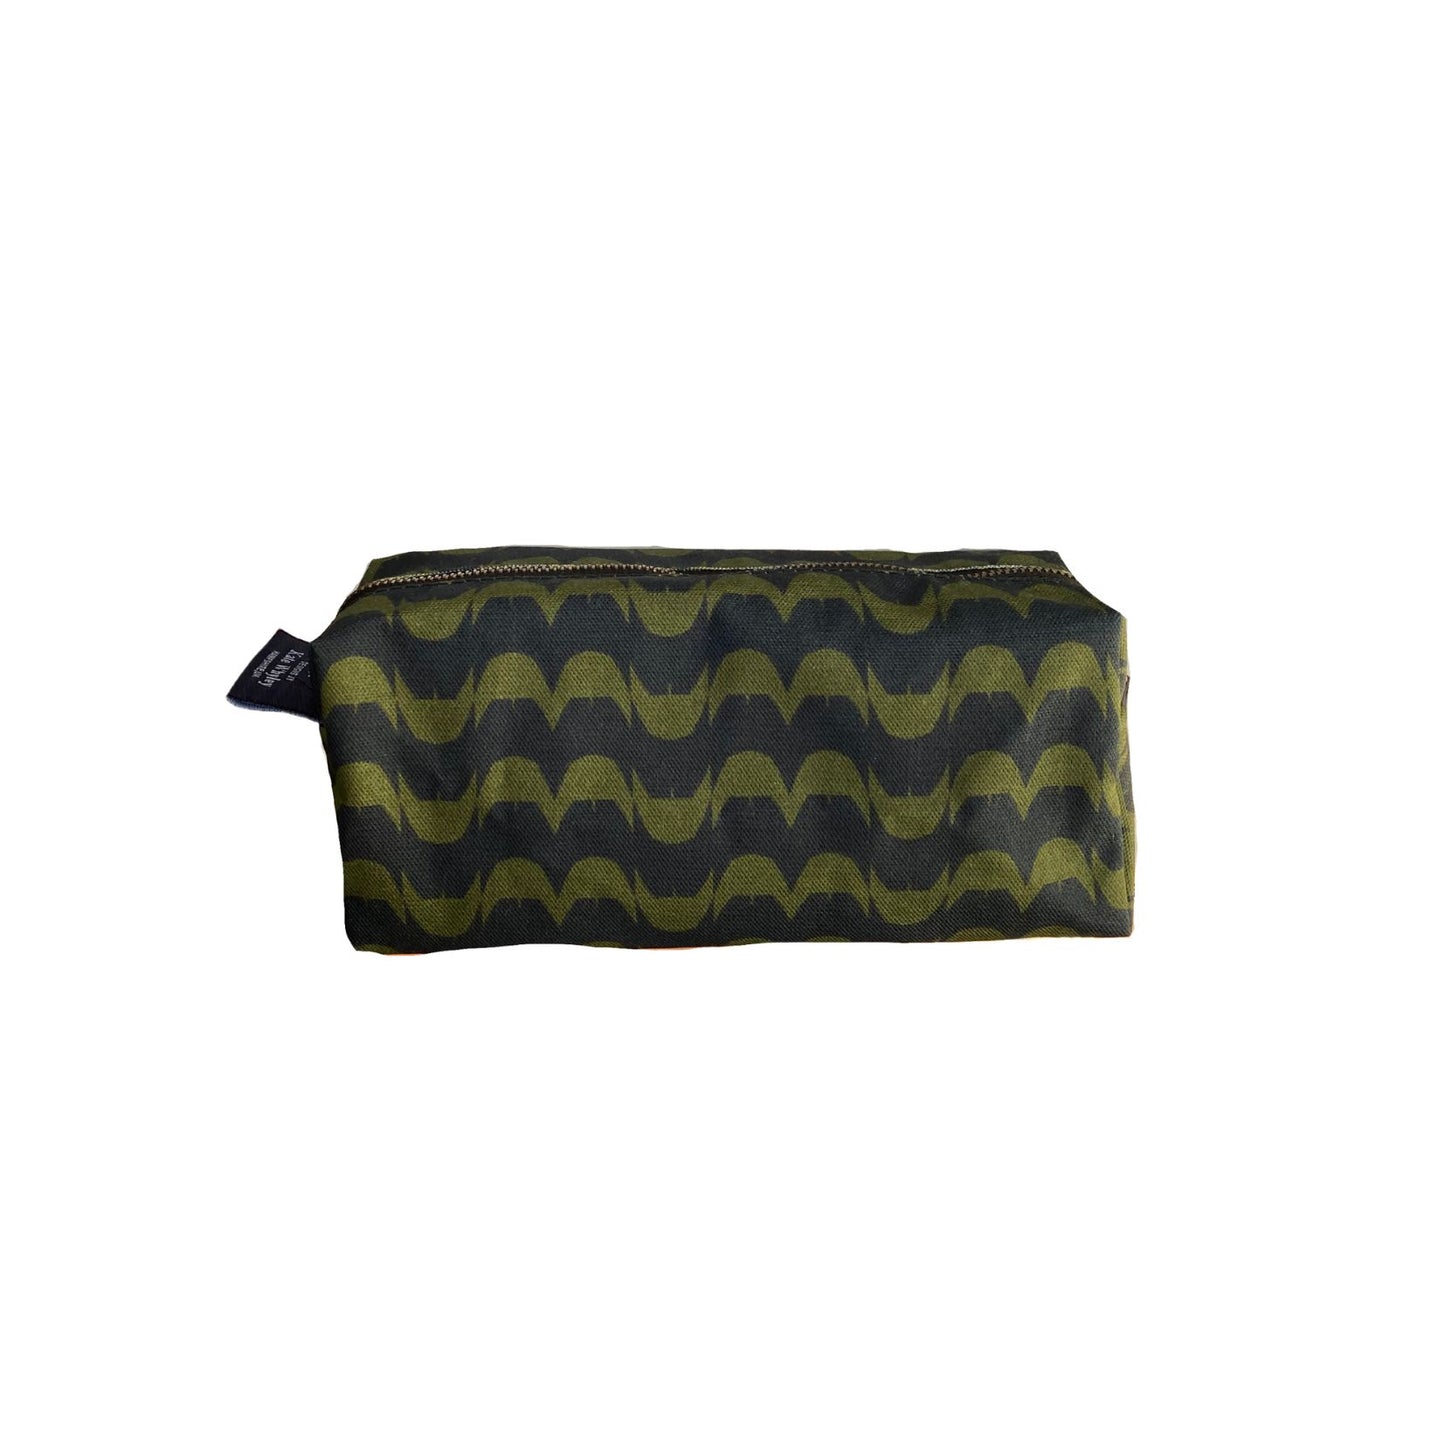 Handcrafted printed cotton pouch - Olive Scallop